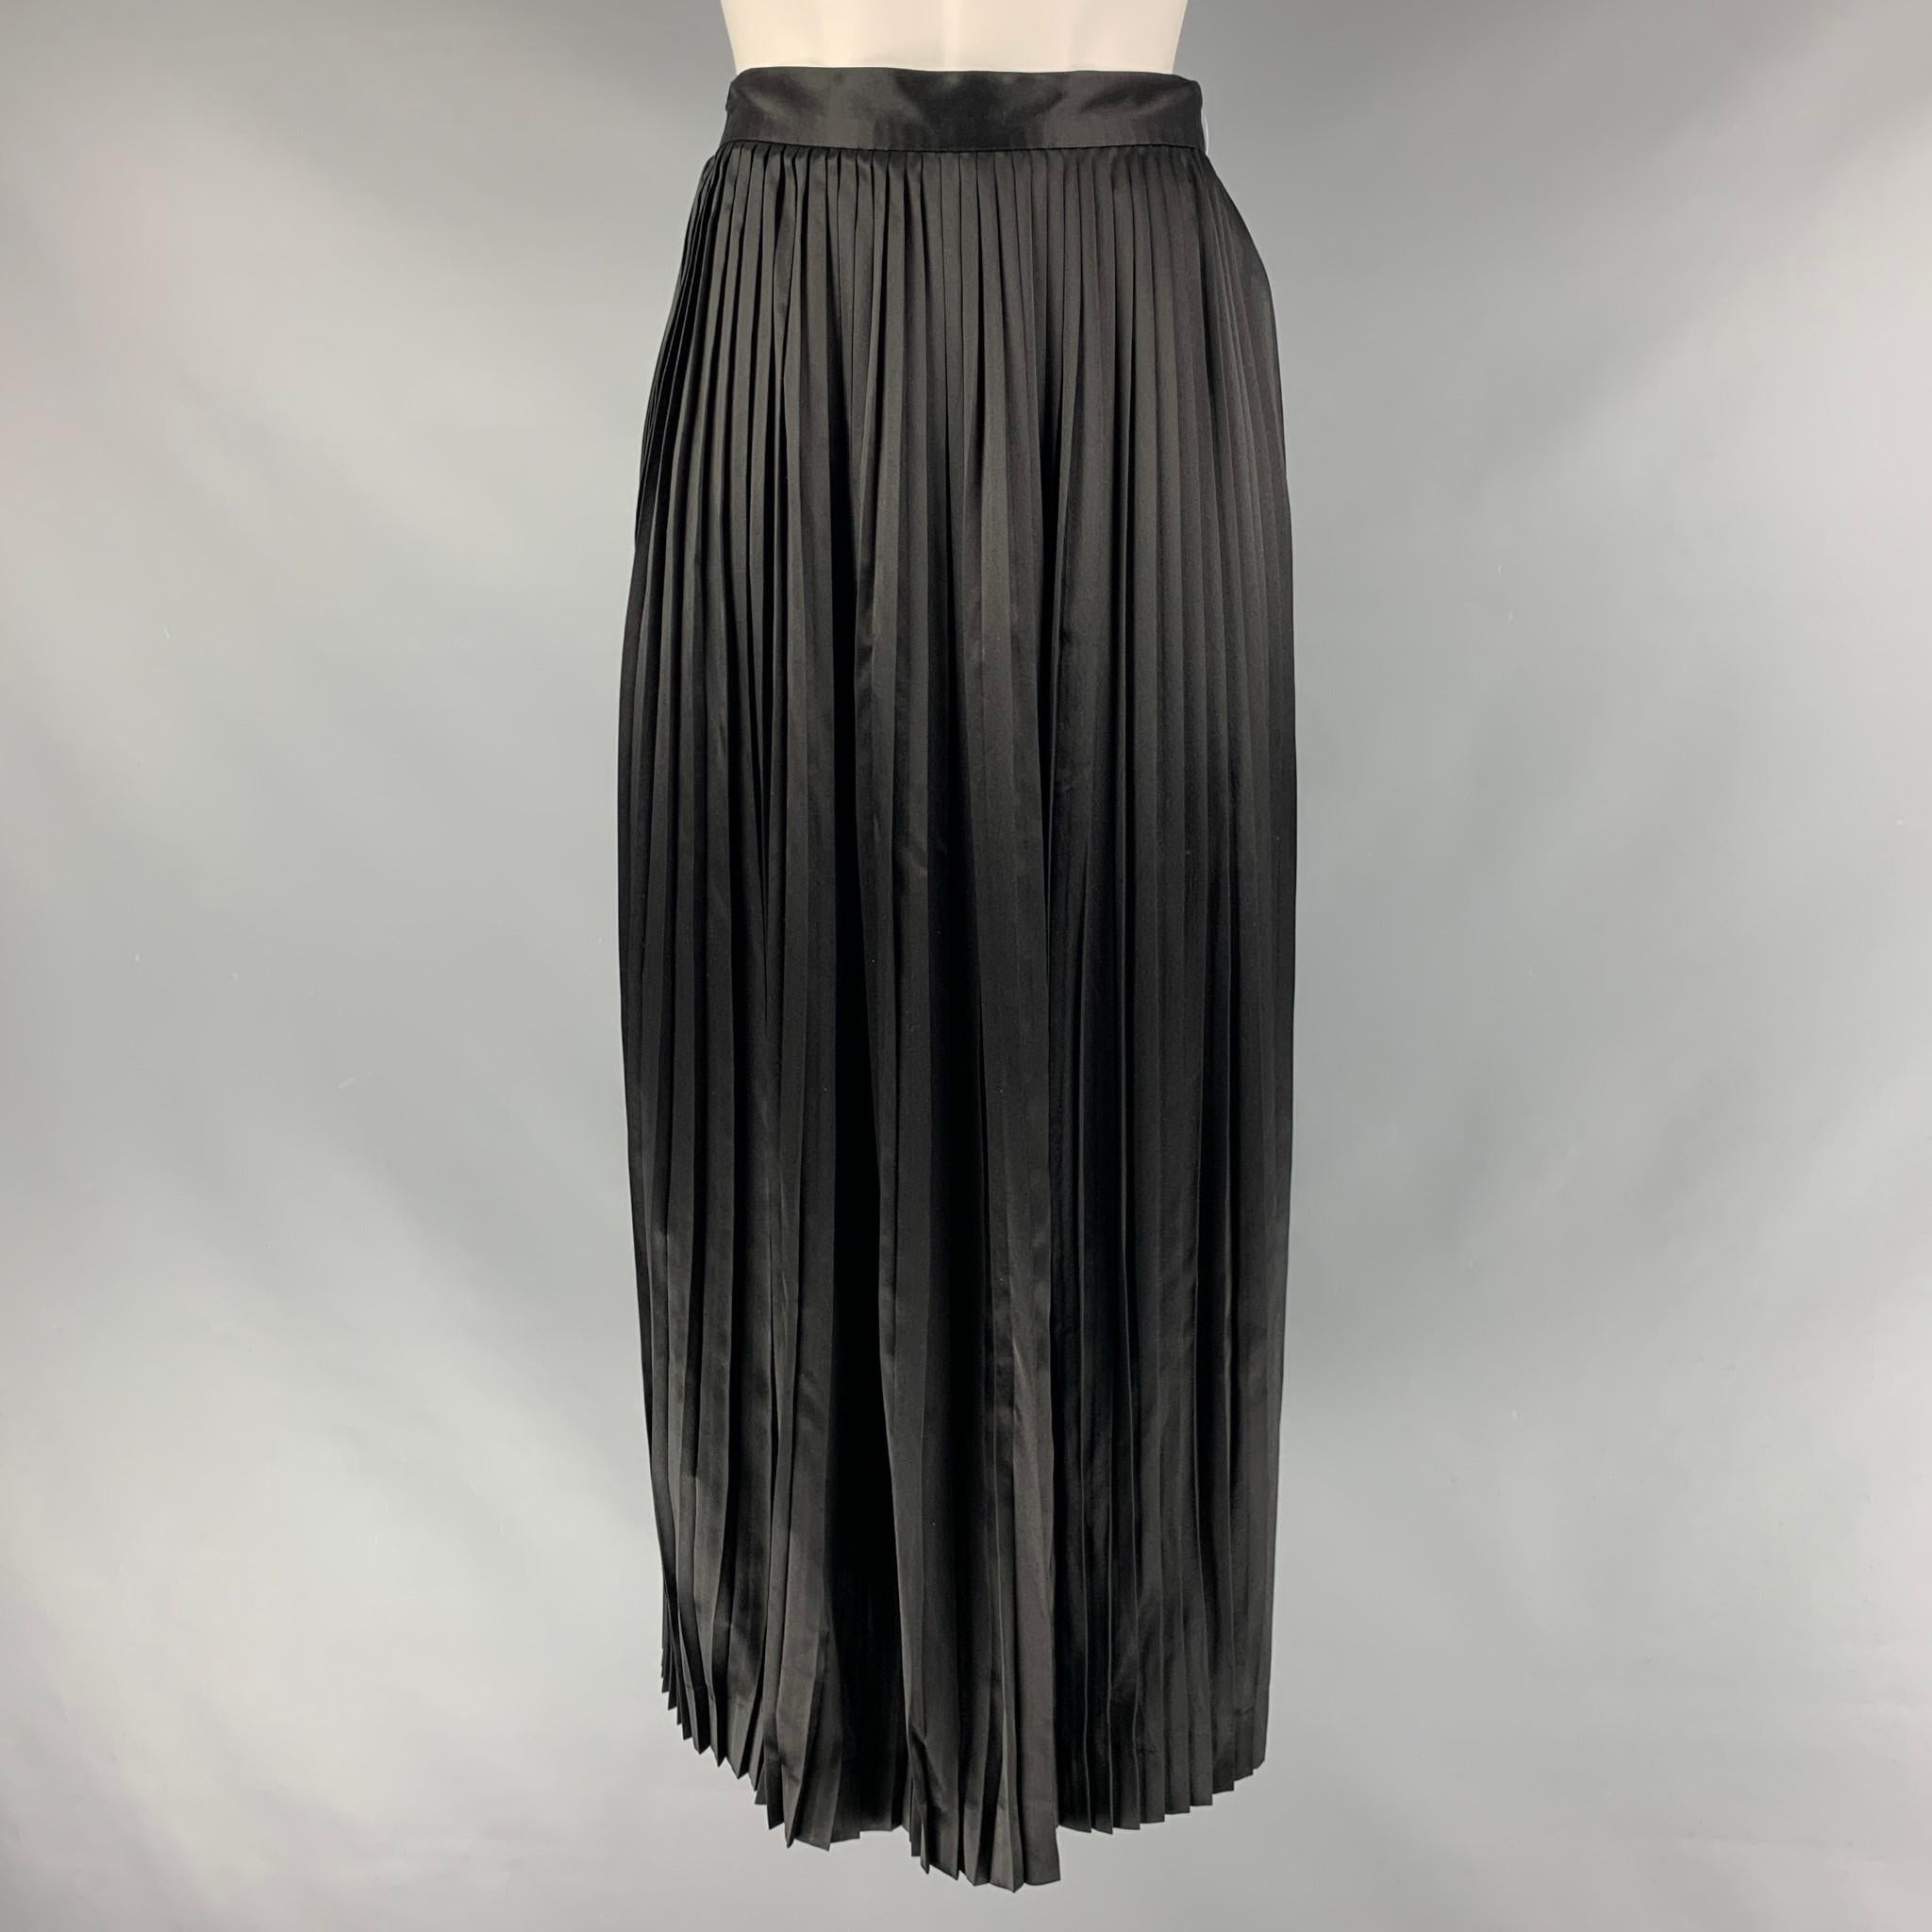 CHRISTIAN DIOR Mid-Calf skirt comes in a black silk material featuring a pleated style and an seam side zip up closure. Made in France.

Excellent Pre-Owned Condition.
Marked: 4

Measurements:

Waist: 26 in.
Hip: 50 in.
Length: 33 in.  